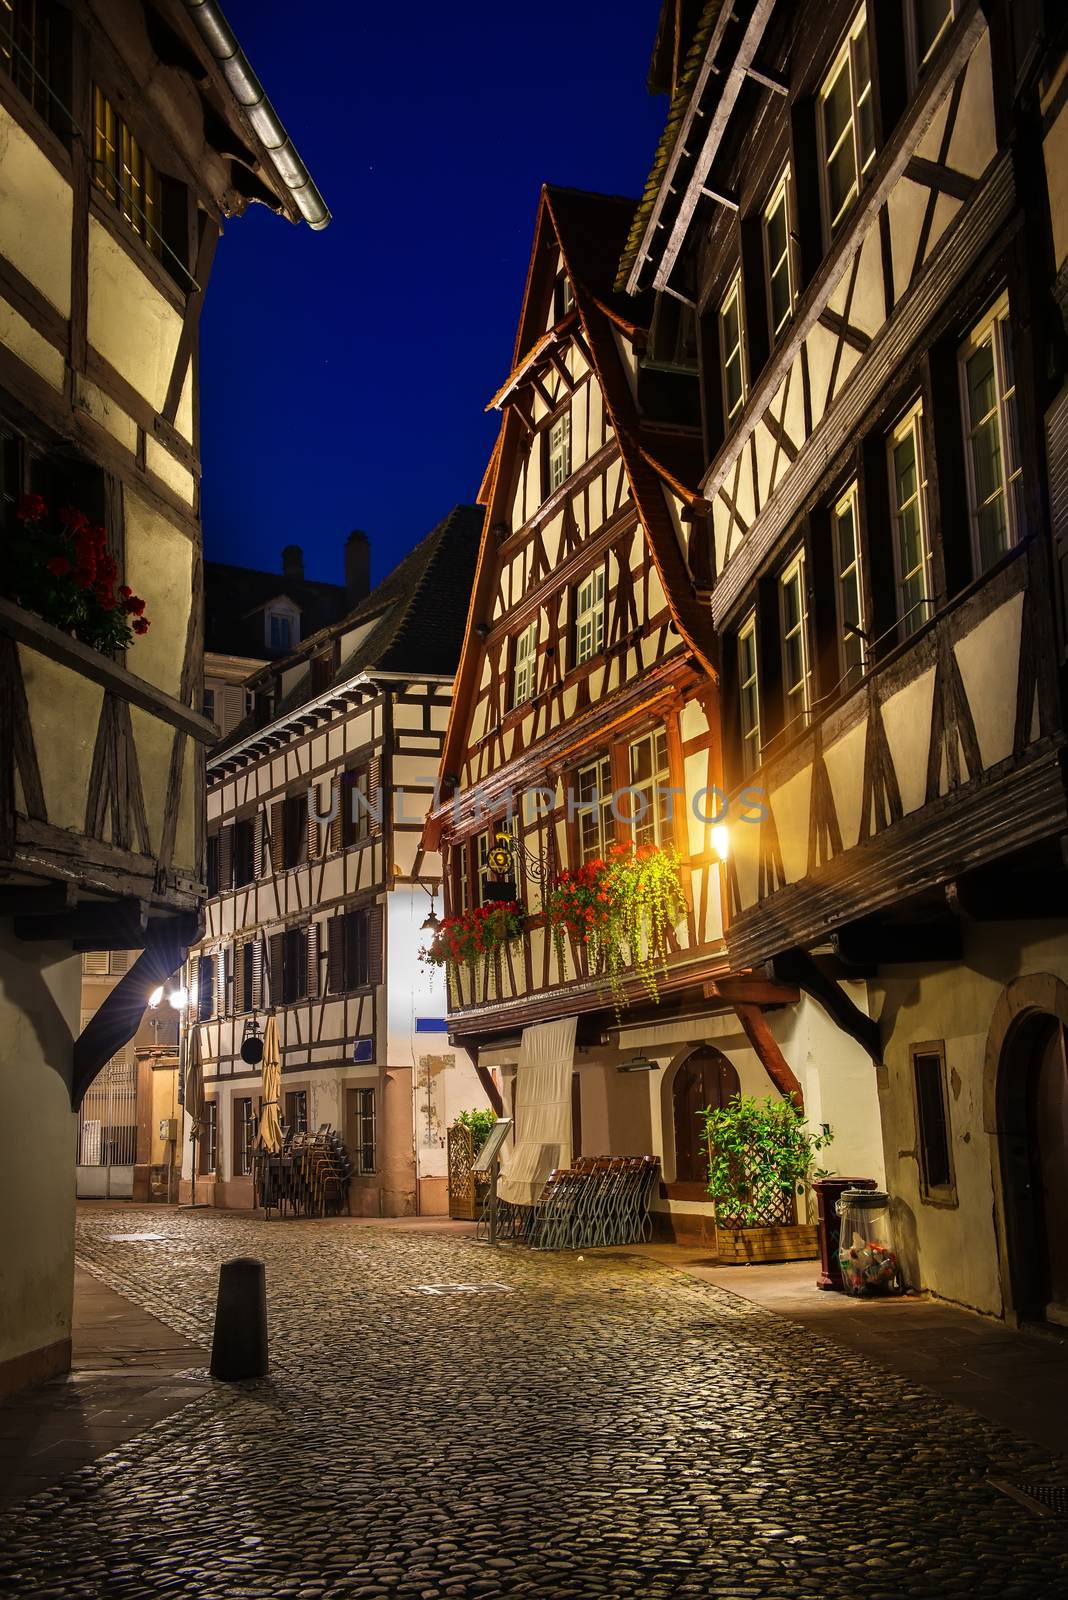 Cafes on street of Strasbourg in the night, France